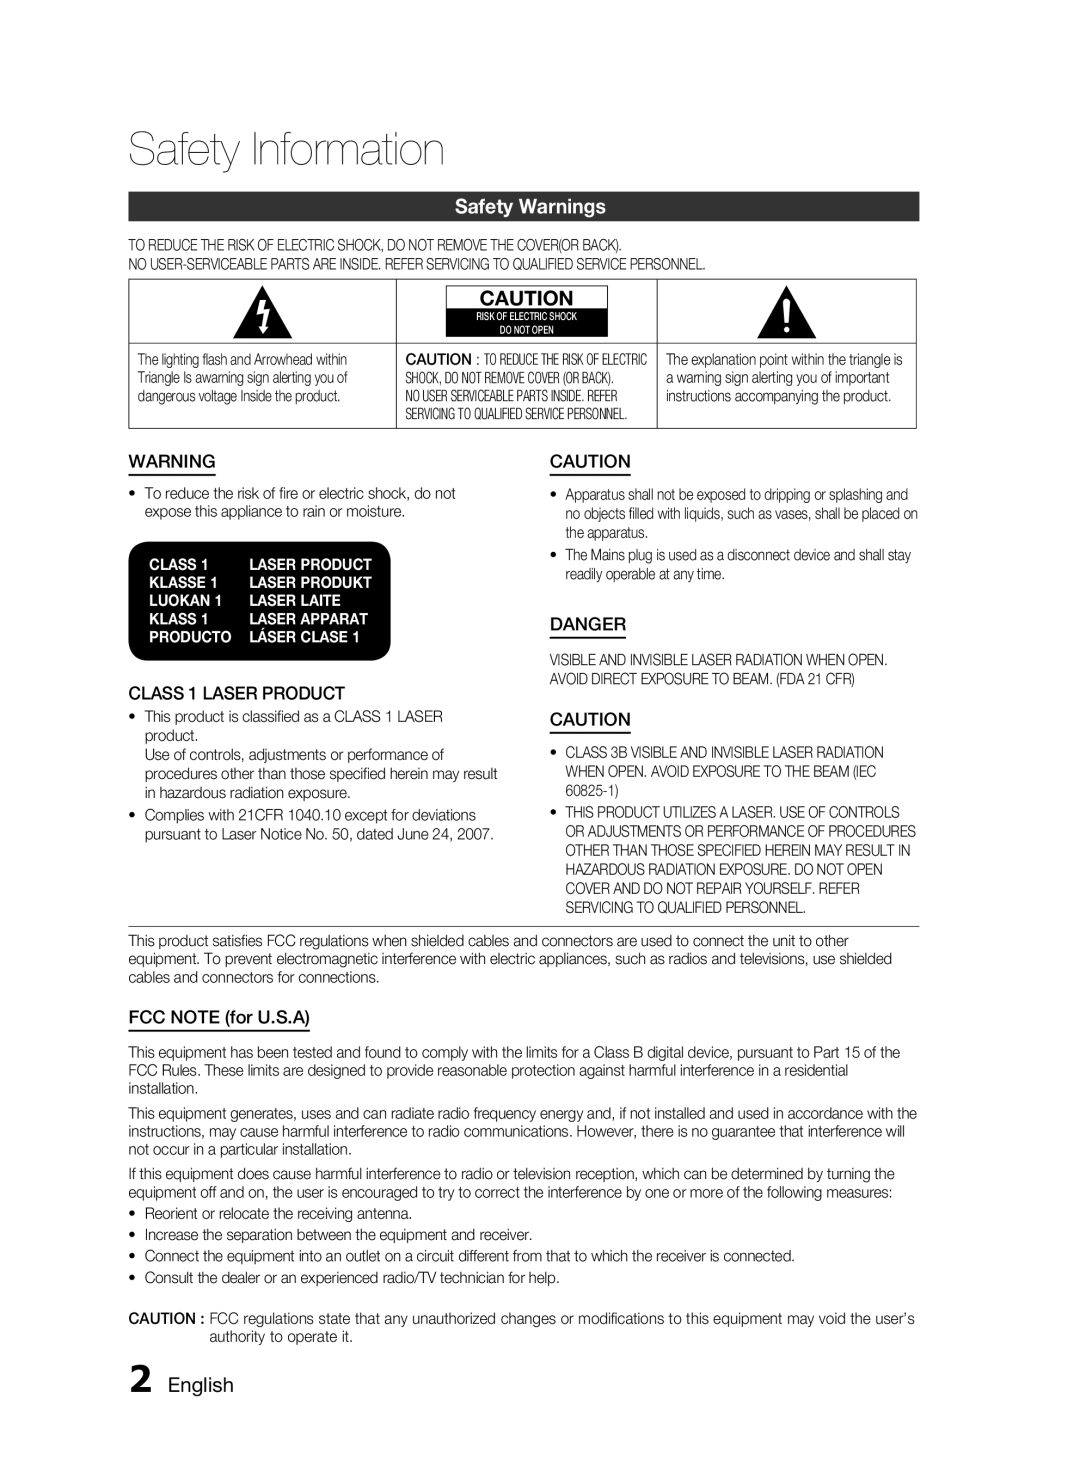 Samsung HW-D7000 Safety Information, Safety Warnings, Class, Klasse, Luokan, Laser Laite, Laser Apparat, Producto 